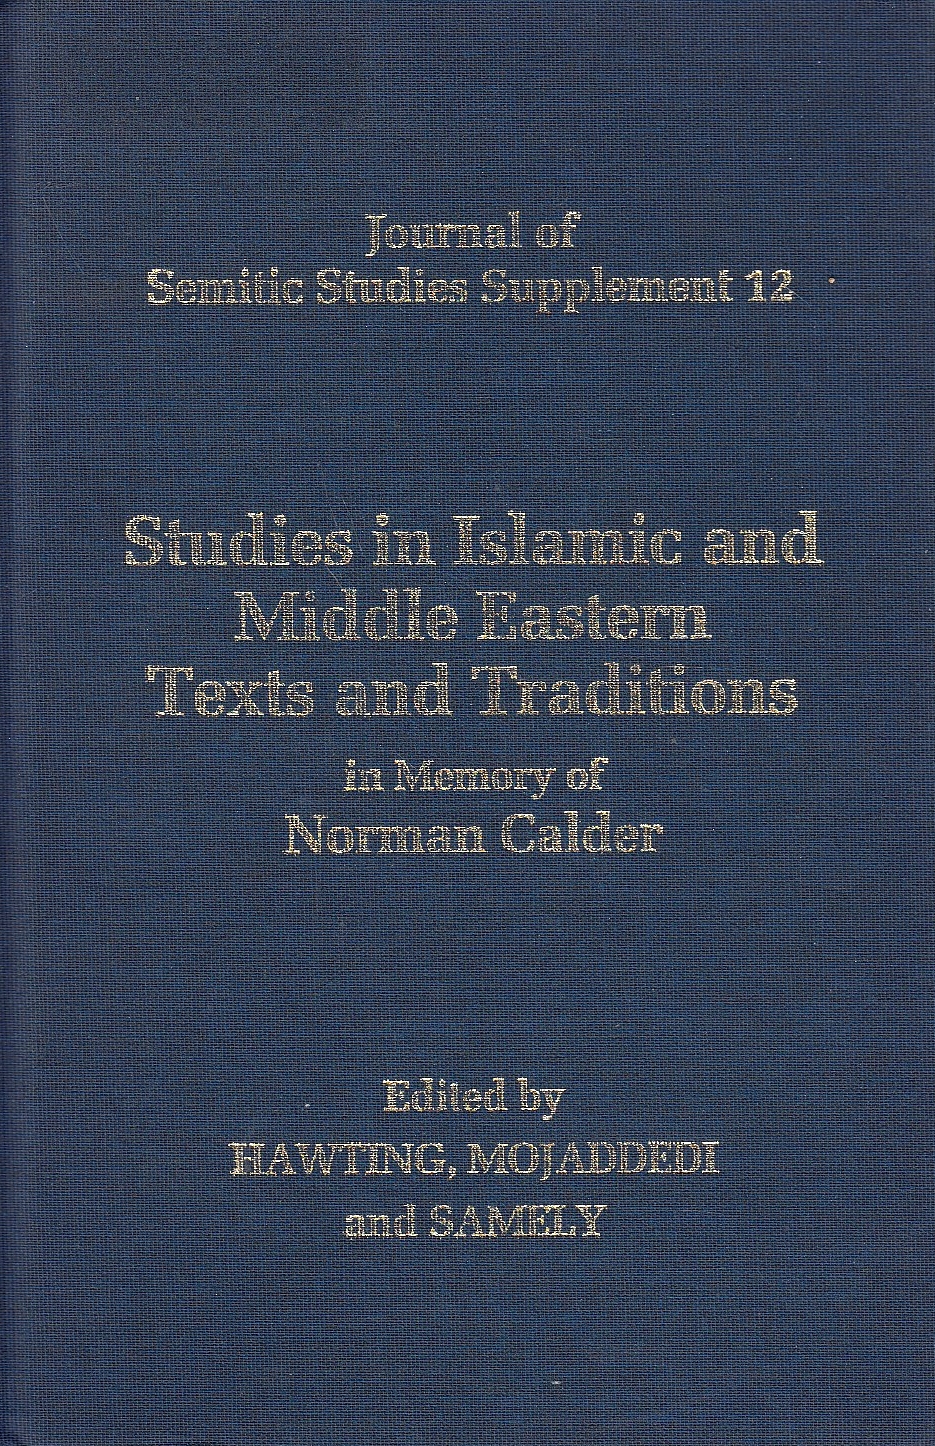 Studies in Islamic and Middle Eastern texts and traditions in memory of Norman Calder